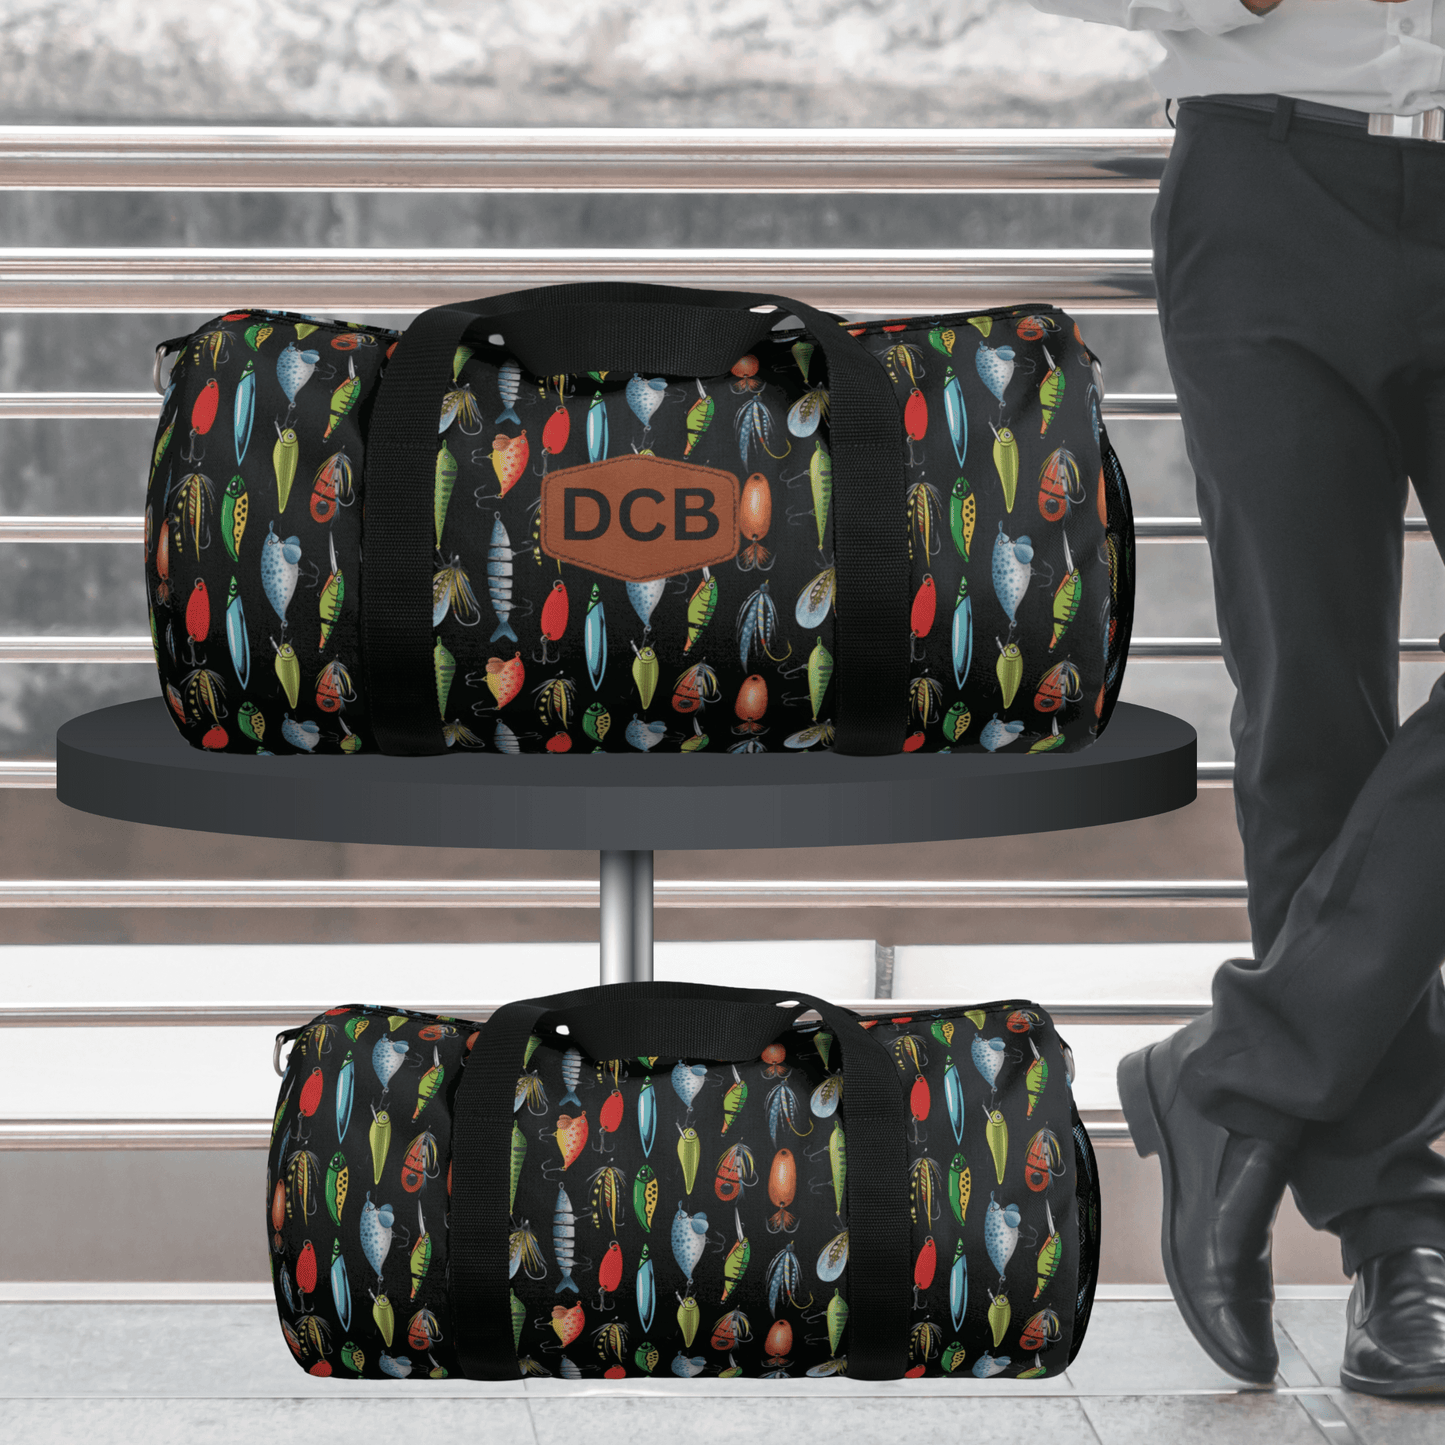 This monogrammed fishing lure duffel bag makes the perfect gift for any fishermen or outdoorsmen. The black bag with colorful lures can be personalized with their initials.